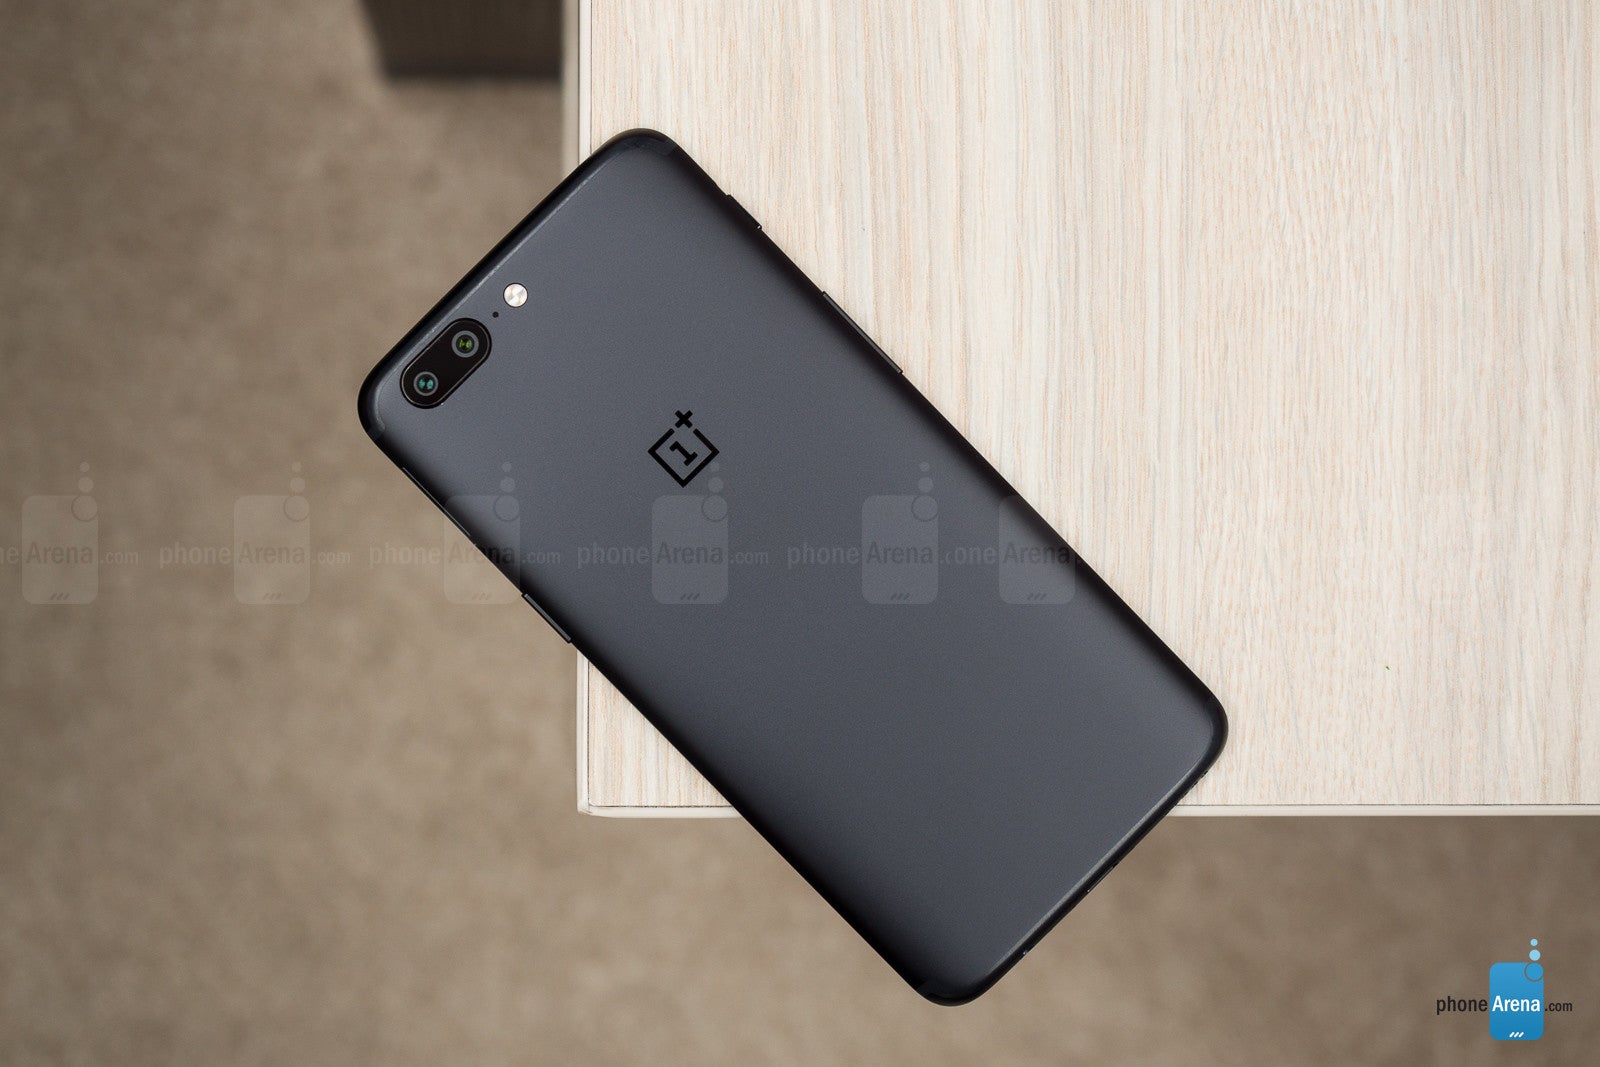 OnePlus 5 product manager talks about behind the scenes process, reveals partial water resistance